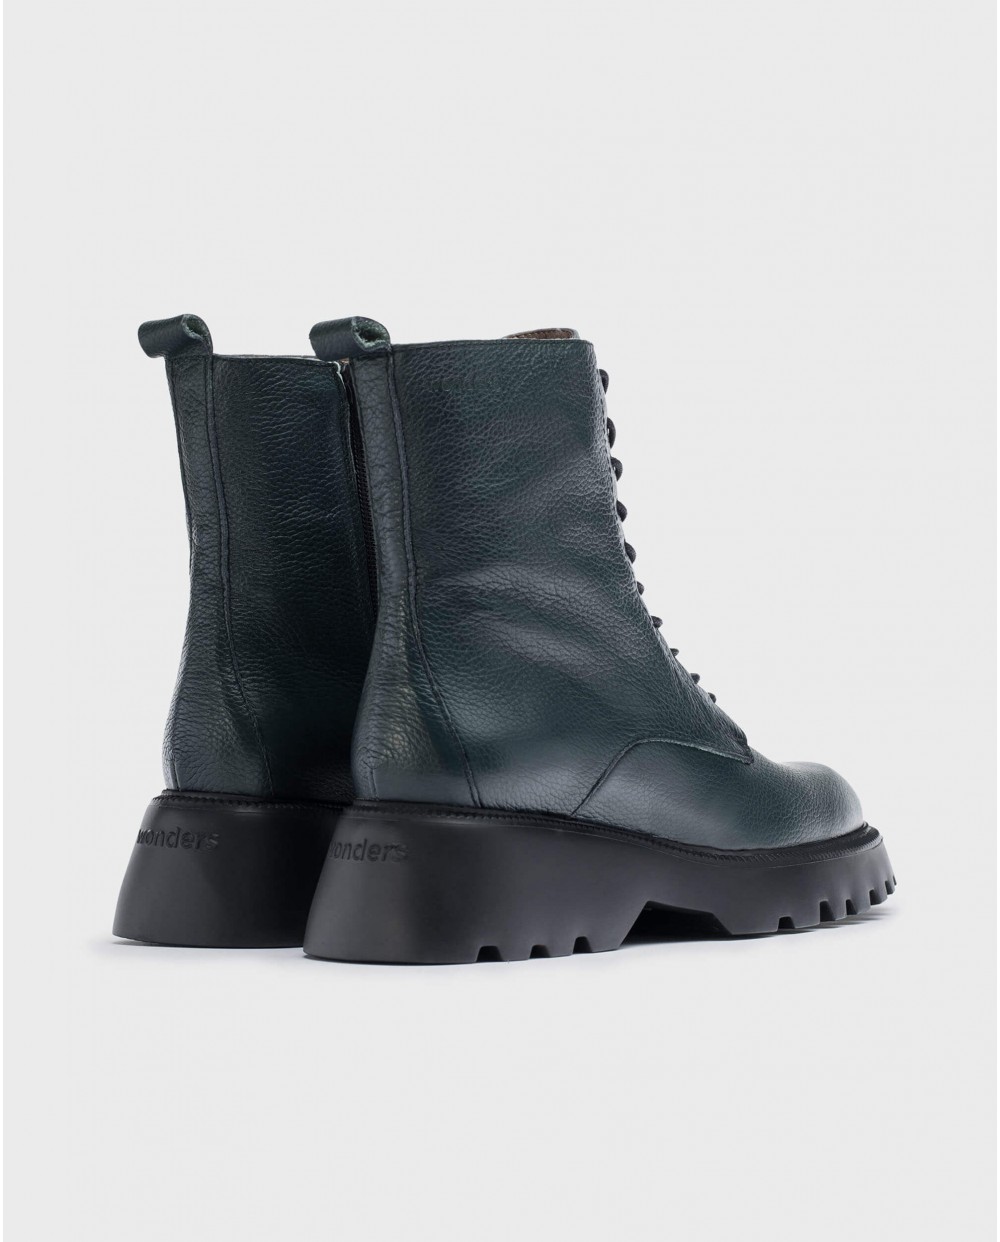 Wonders-Ankle Boots-Green leather ATARI ankle boot